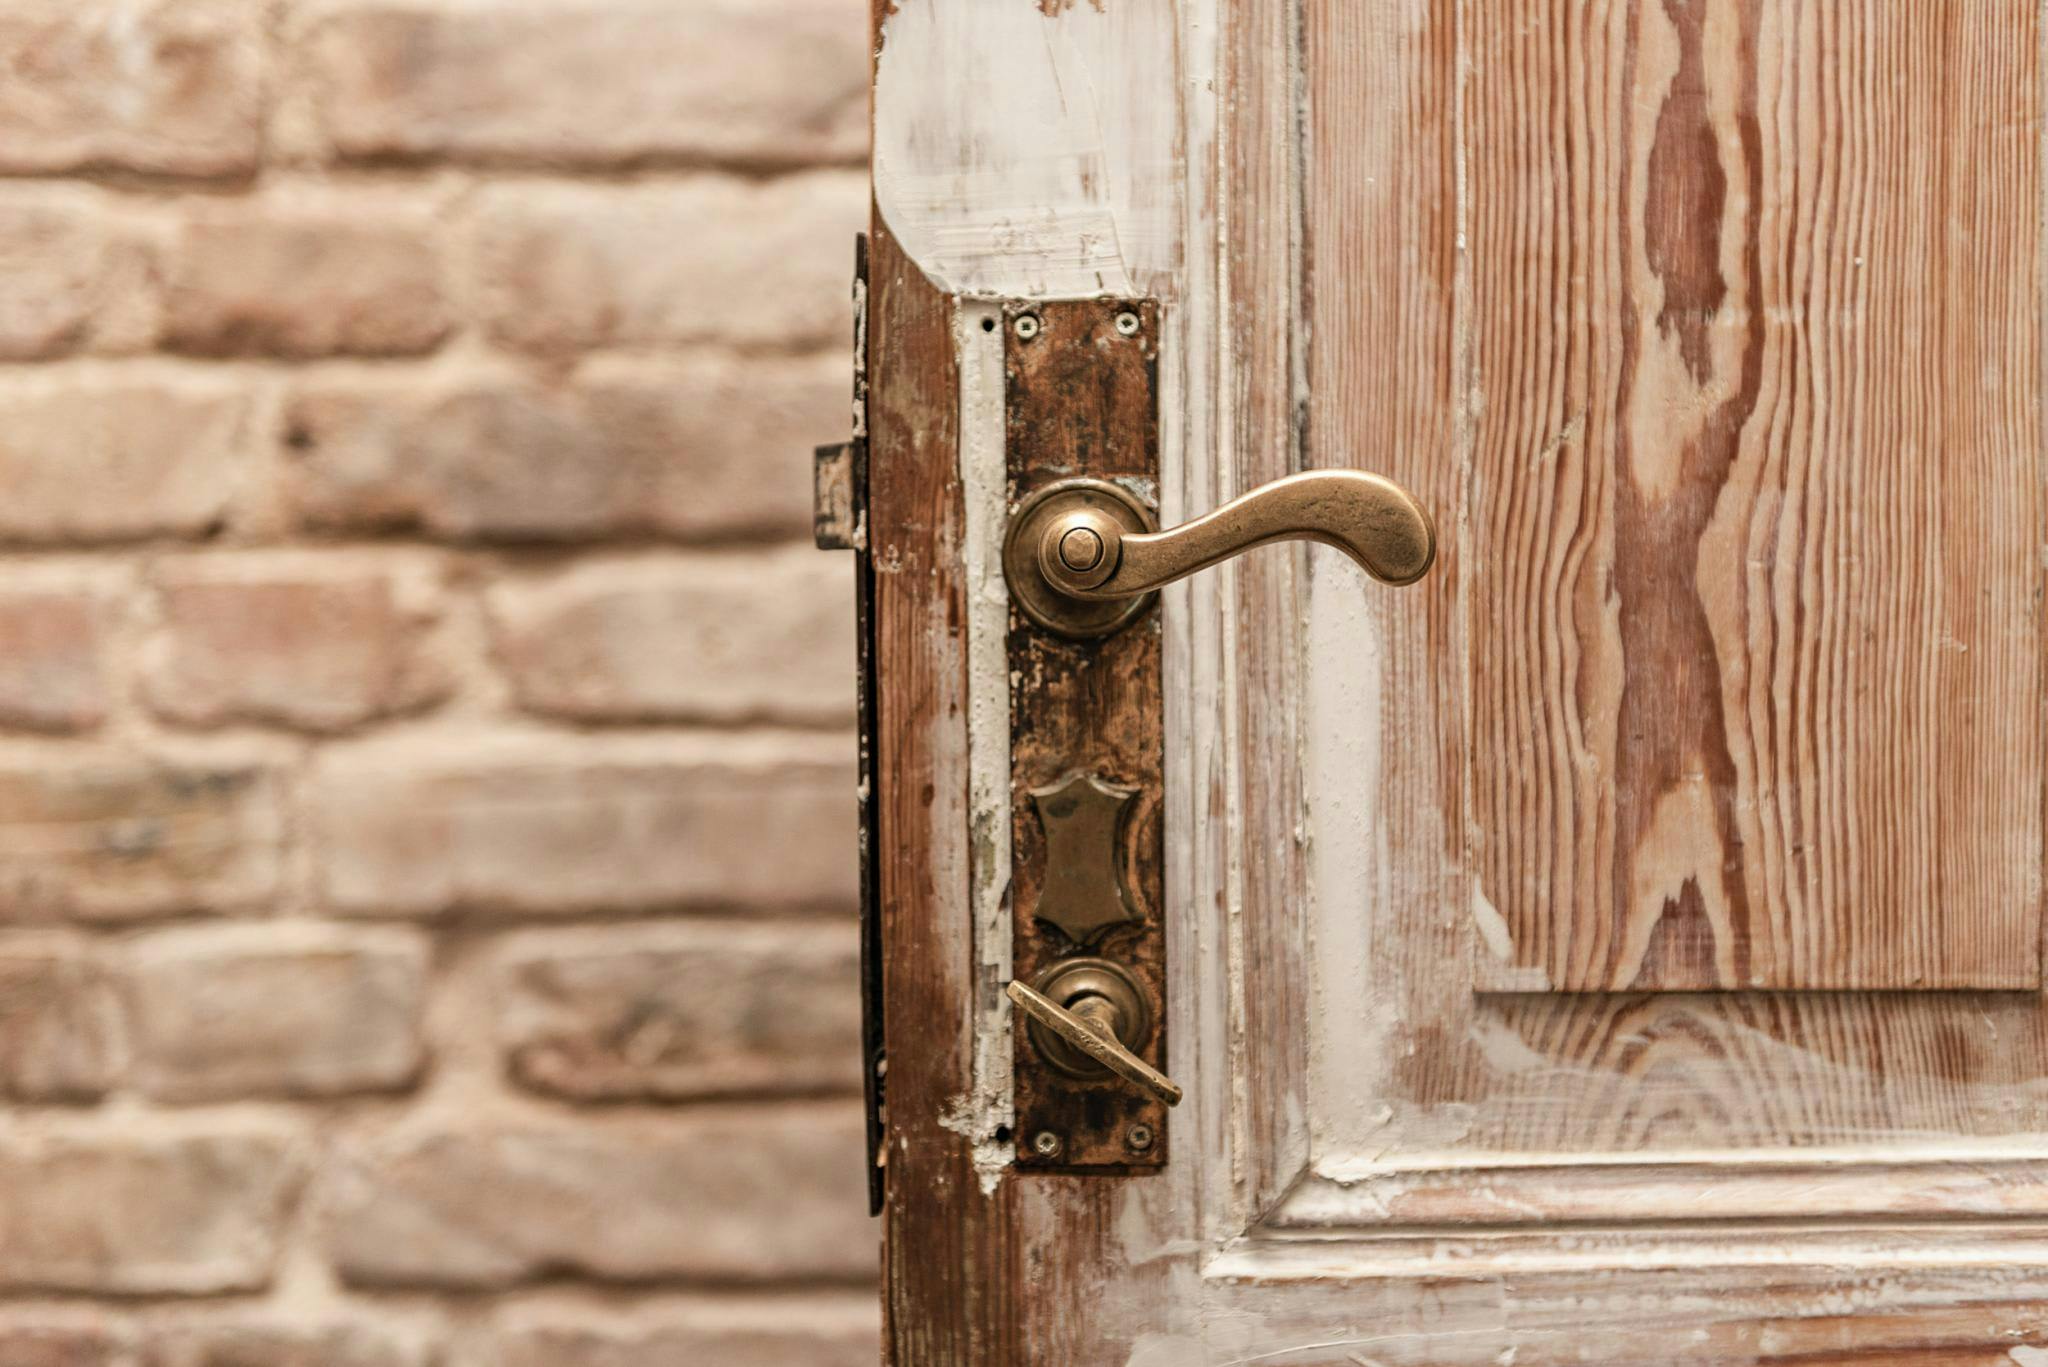 The image features a wooden door with a brass handle, which is open and slightly ajar, revealing a brick wall behind it.